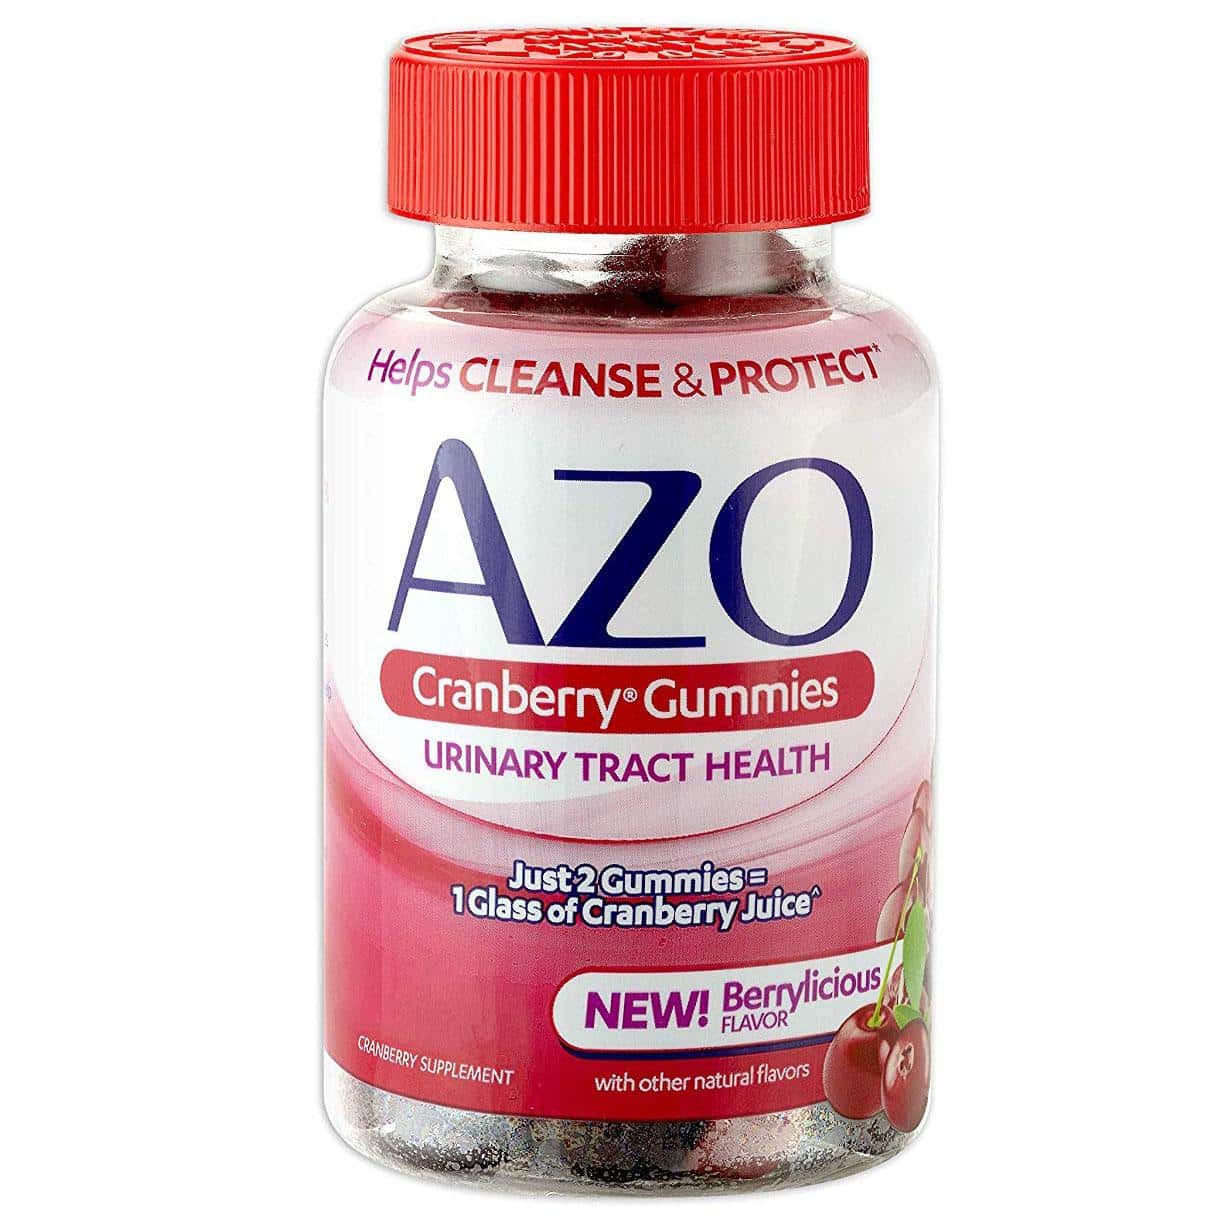 AZO Cranberry Urinary Tract Health Supplement Gummies Deals